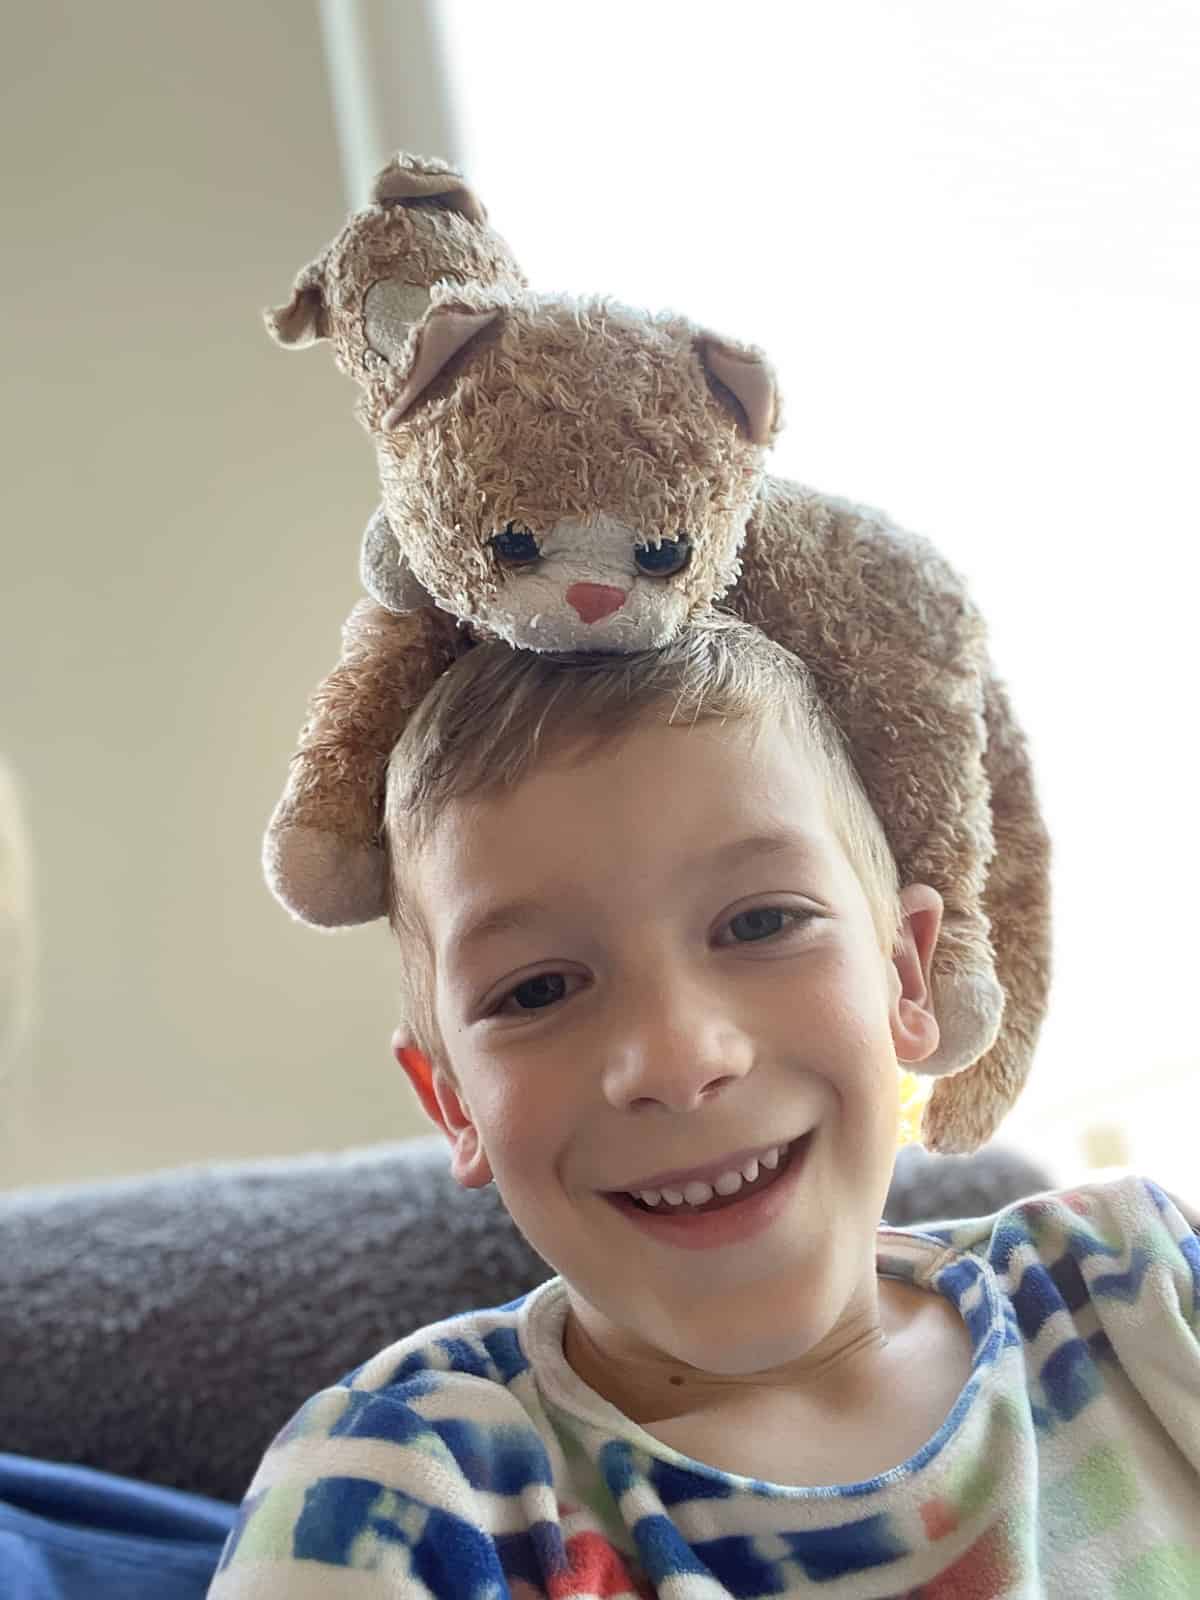 a kid with 2 stuffed cats on his head.